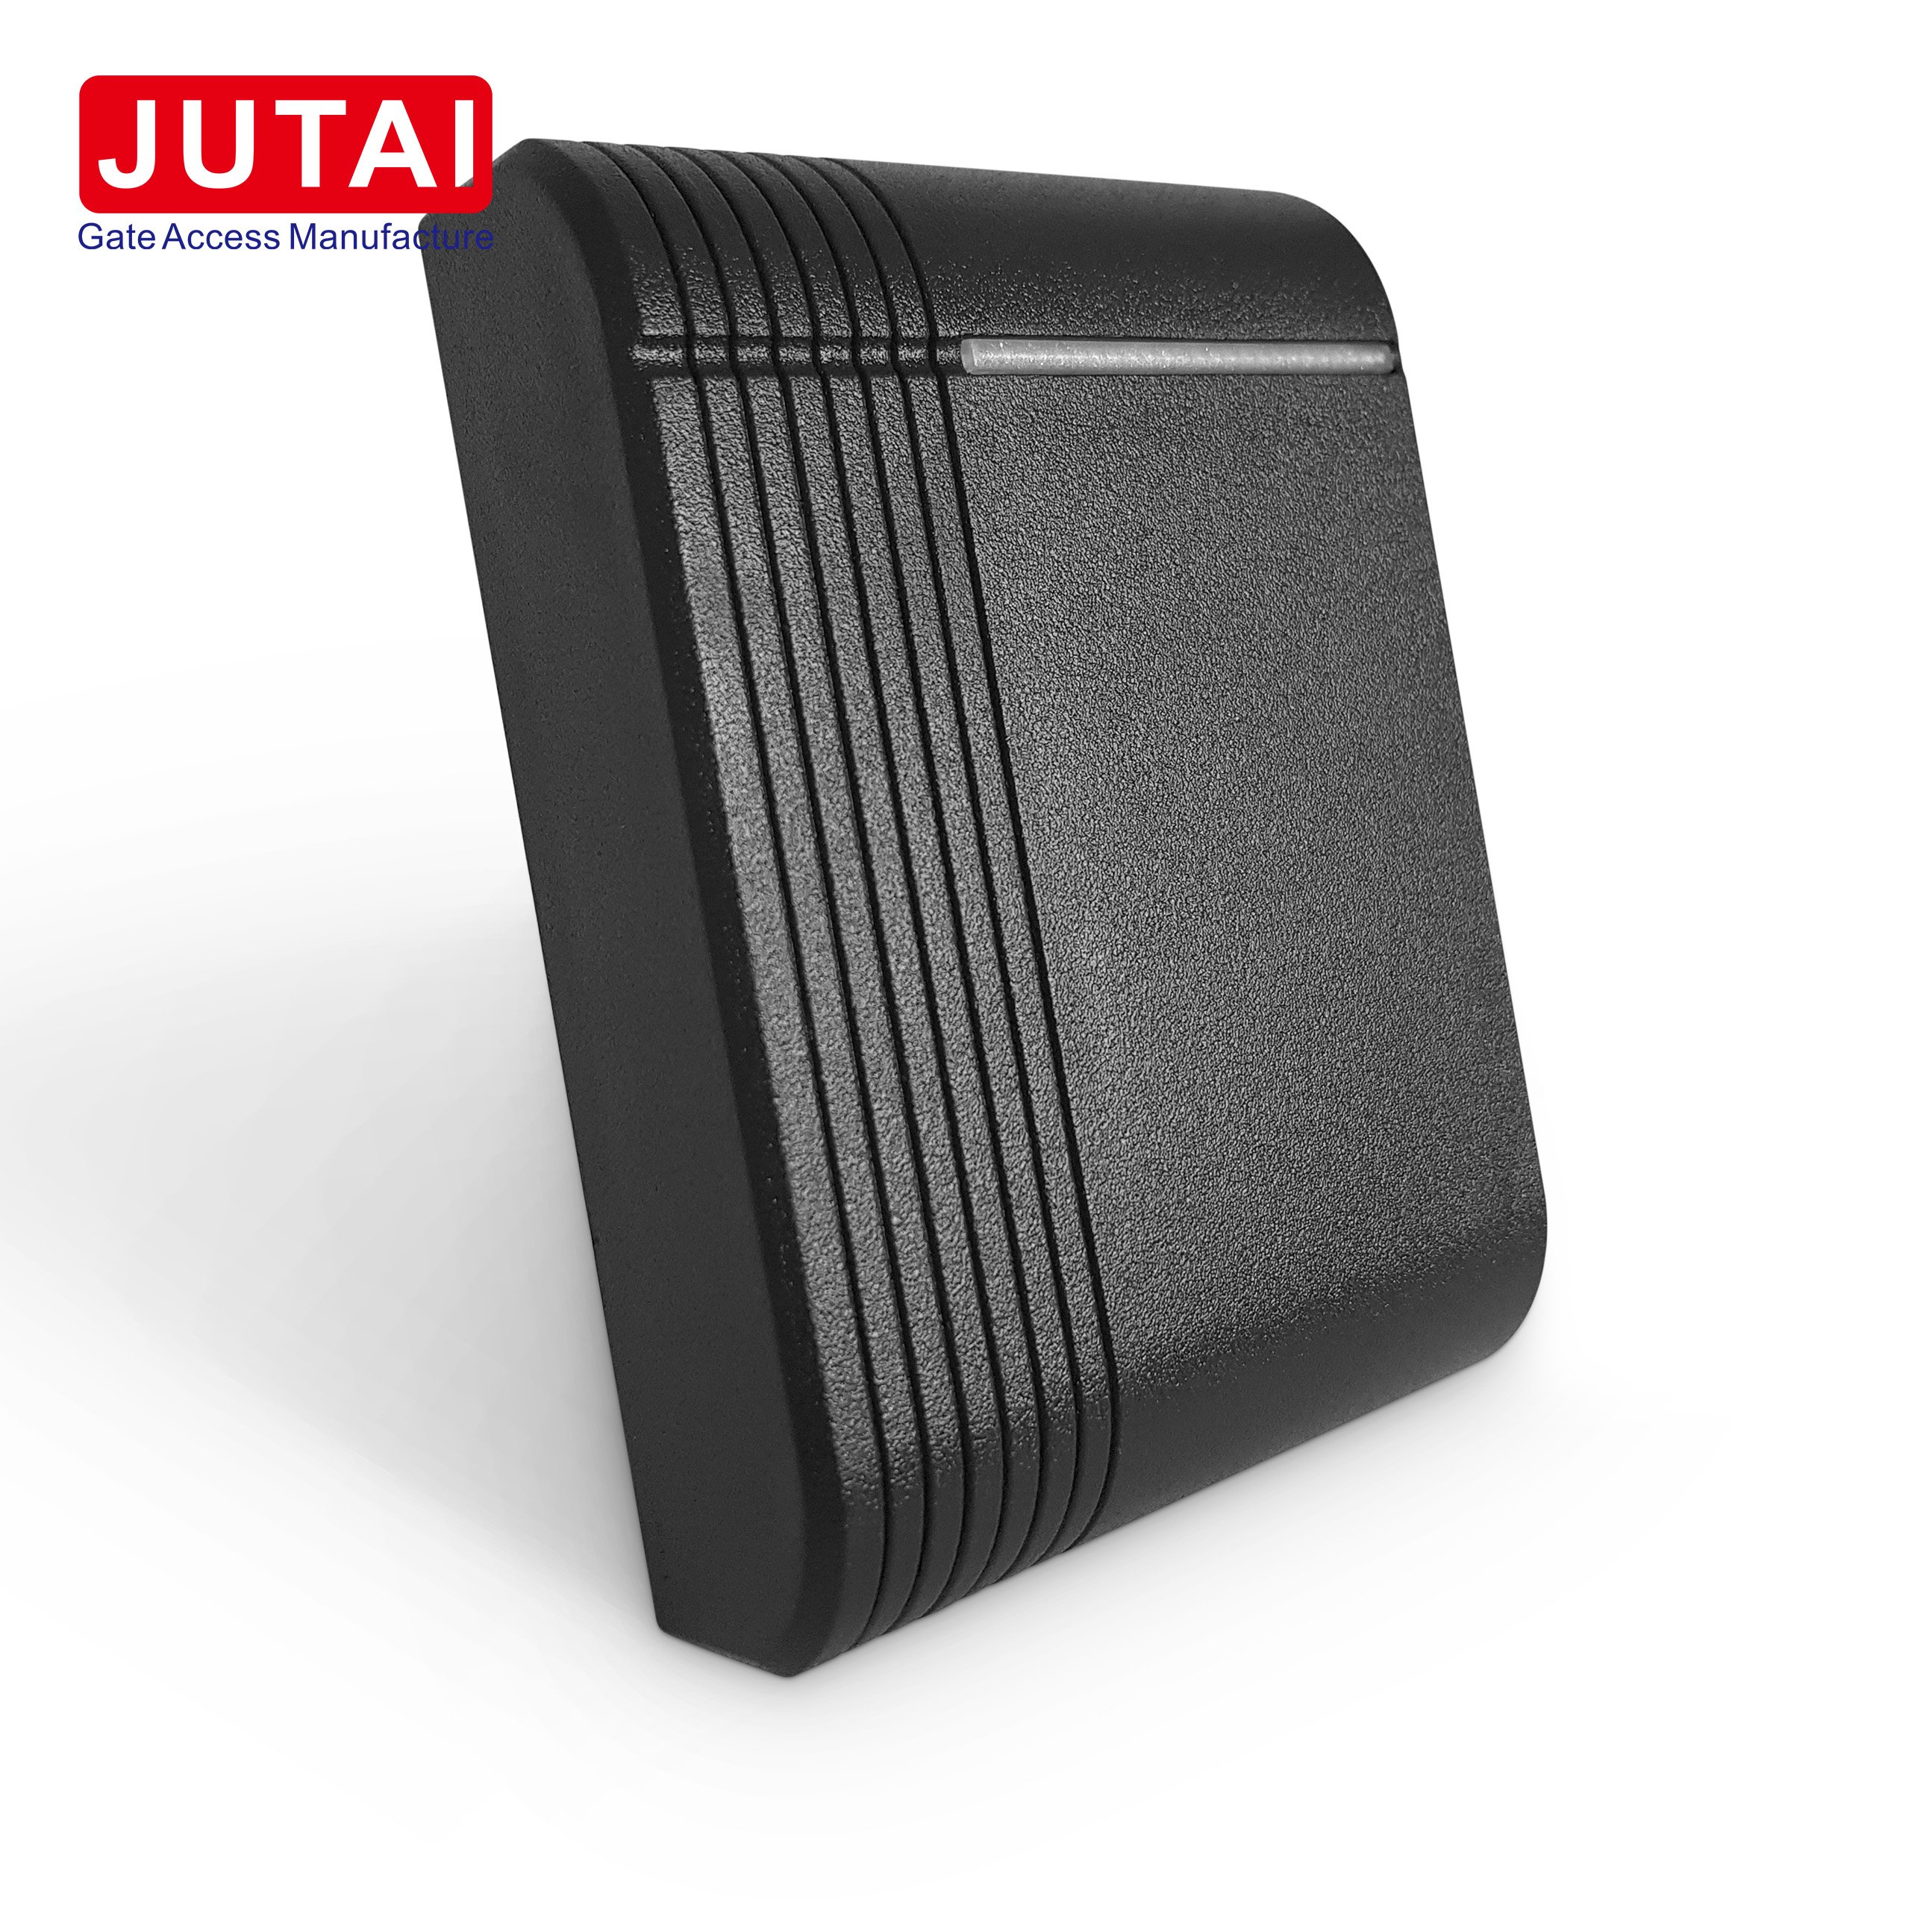 JTPR-32TM Dual Frequency RFID Card Reader Standalone